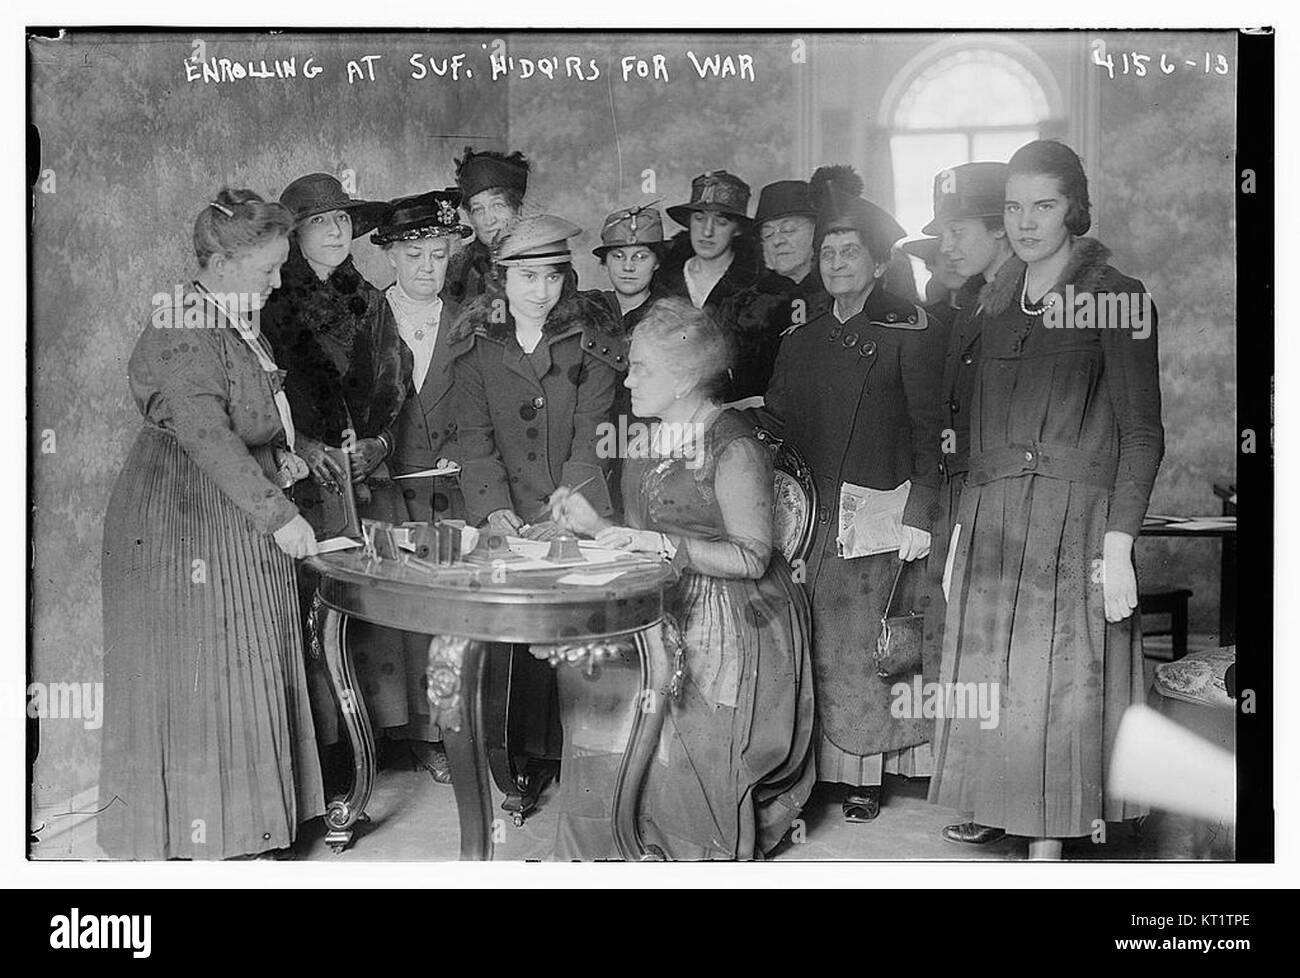 Enrolling at suf. (i.e. suffragette) h'dq'rs. for War  (16872629351) Stock Photo